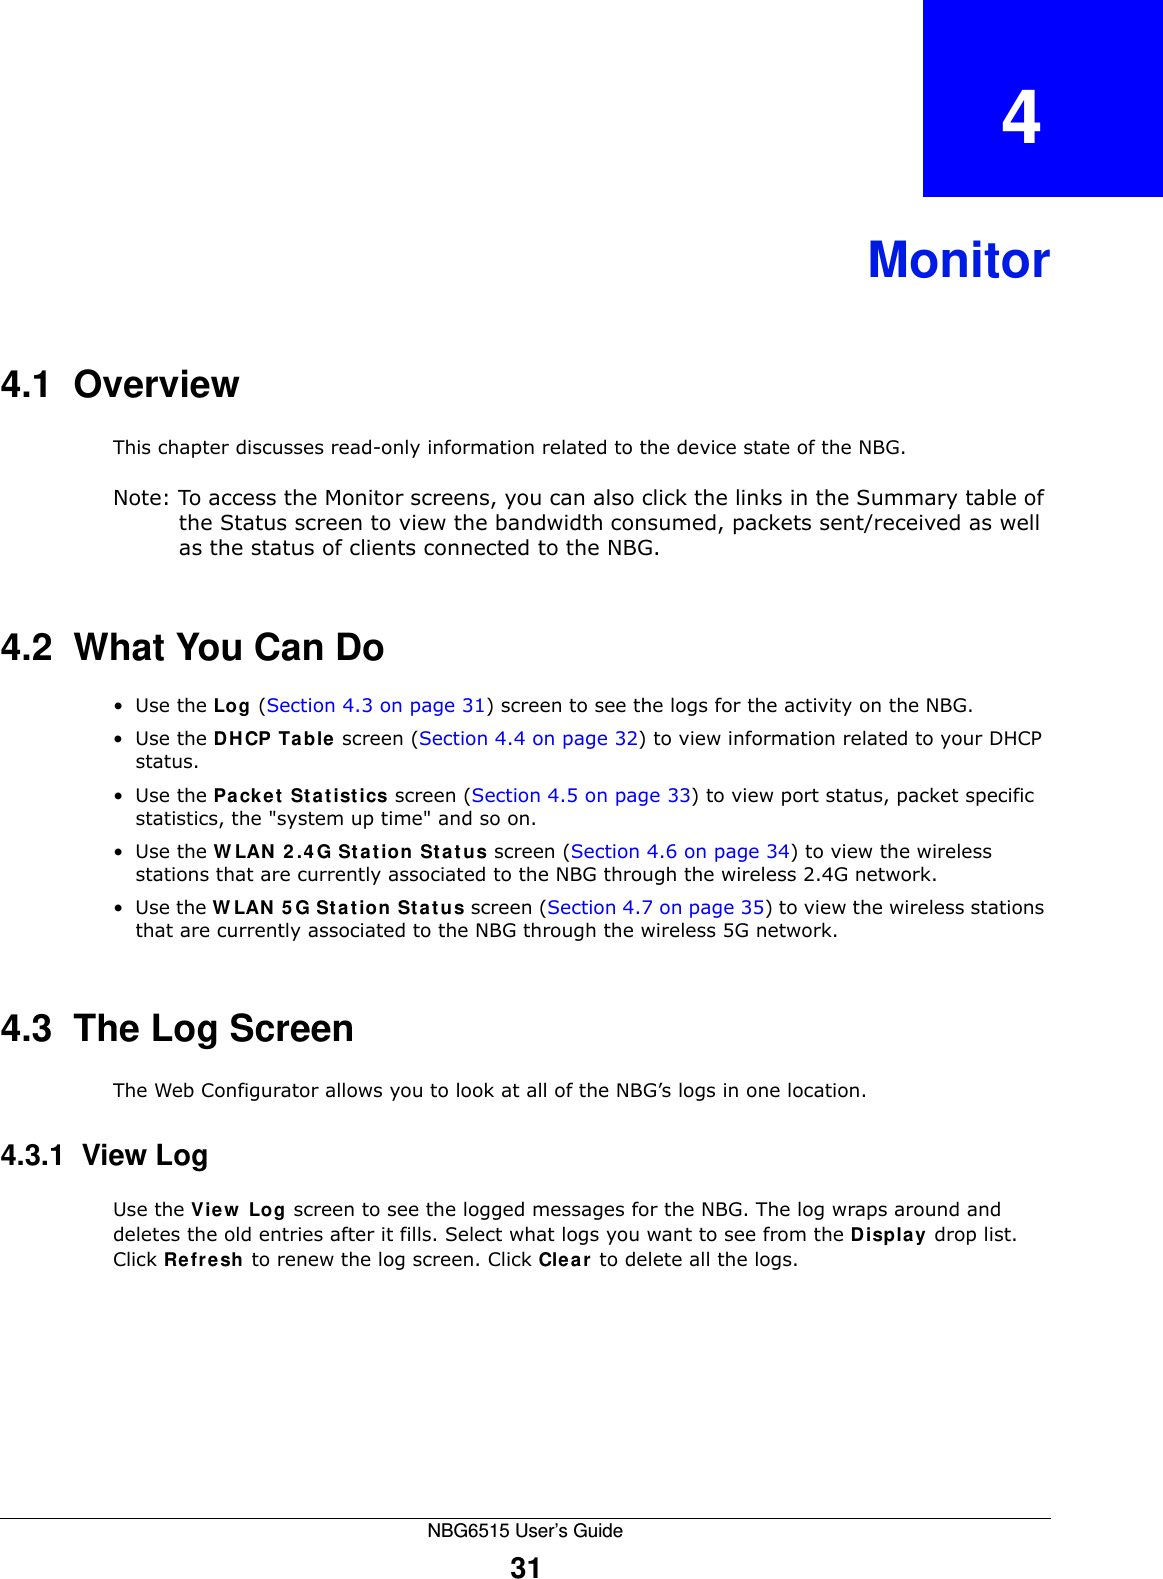 NBG6515 User’s Guide31CHAPTER   4Monitor4.1  OverviewThis chapter discusses read-only information related to the device state of the NBG. Note: To access the Monitor screens, you can also click the links in the Summary table of the Status screen to view the bandwidth consumed, packets sent/received as well as the status of clients connected to the NBG.4.2  What You Can Do•Use the Log (Section 4.3 on page 31) screen to see the logs for the activity on the NBG.•Use the DHCP Table screen (Section 4.4 on page 32) to view information related to your DHCP status.•Use the Packet Statistics screen (Section 4.5 on page 33) to view port status, packet specific statistics, the &quot;system up time&quot; and so on.•Use the WLAN 2.4G Station Status screen (Section 4.6 on page 34) to view the wireless stations that are currently associated to the NBG through the wireless 2.4G network.•Use the WLAN 5G Station Status screen (Section 4.7 on page 35) to view the wireless stations that are currently associated to the NBG through the wireless 5G network.4.3  The Log ScreenThe Web Configurator allows you to look at all of the NBG’s logs in one location.4.3.1  View LogUse the View Log screen to see the logged messages for the NBG. The log wraps around and deletes the old entries after it fills. Select what logs you want to see from the Display drop list. Click Refresh to renew the log screen. Click Clear to delete all the logs.